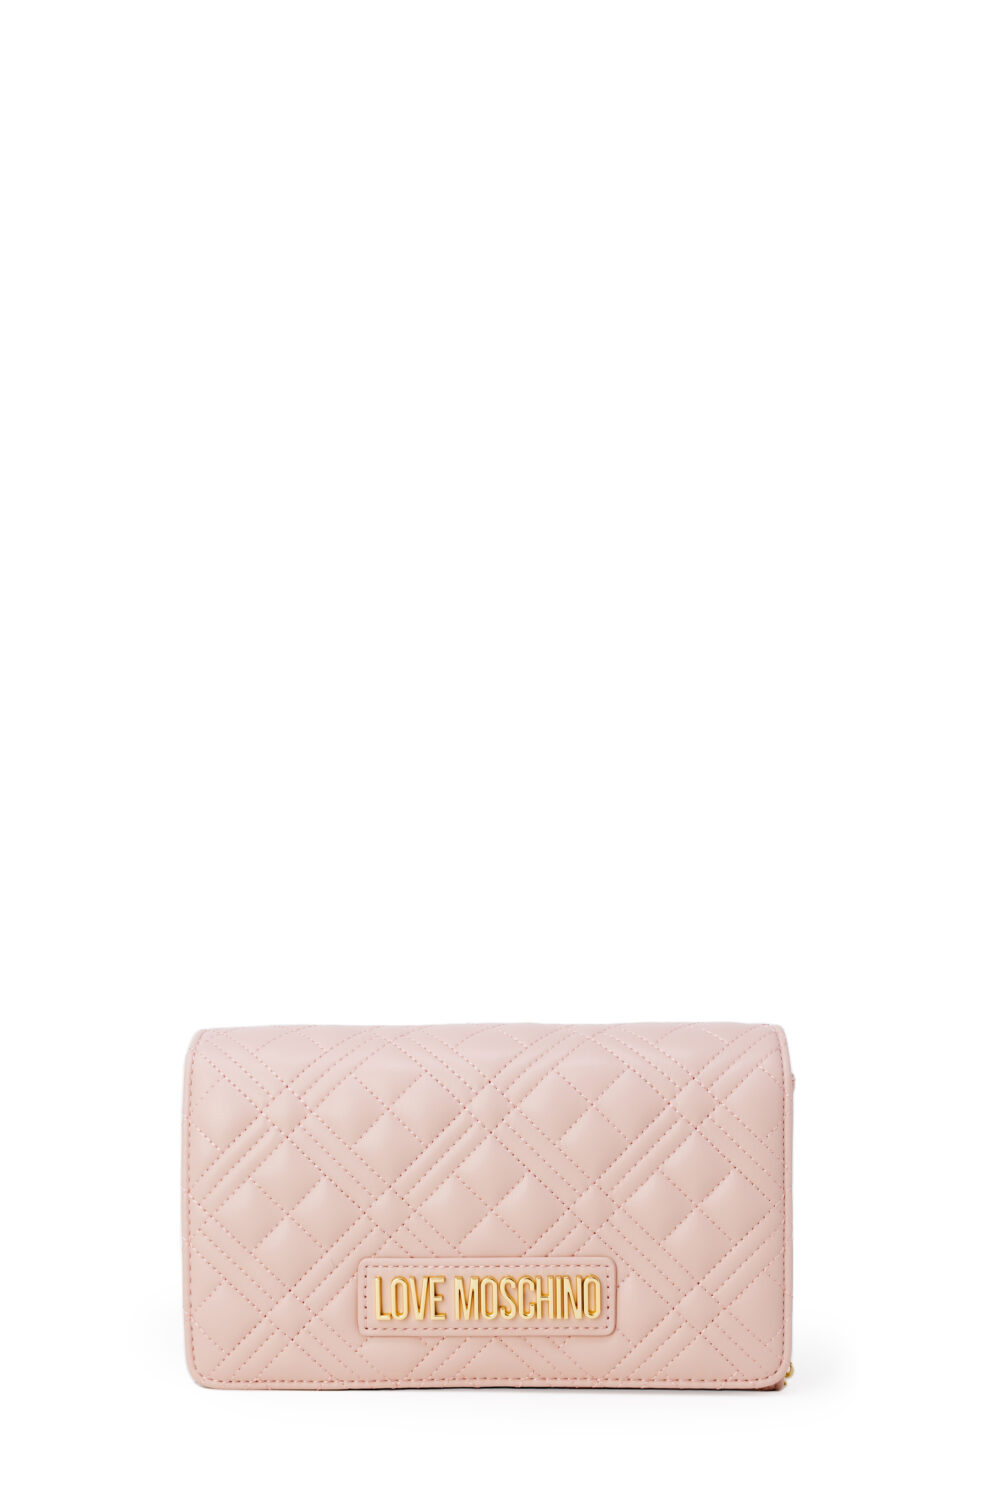 Borsa Love Moschino quilted Rosa - Foto 1